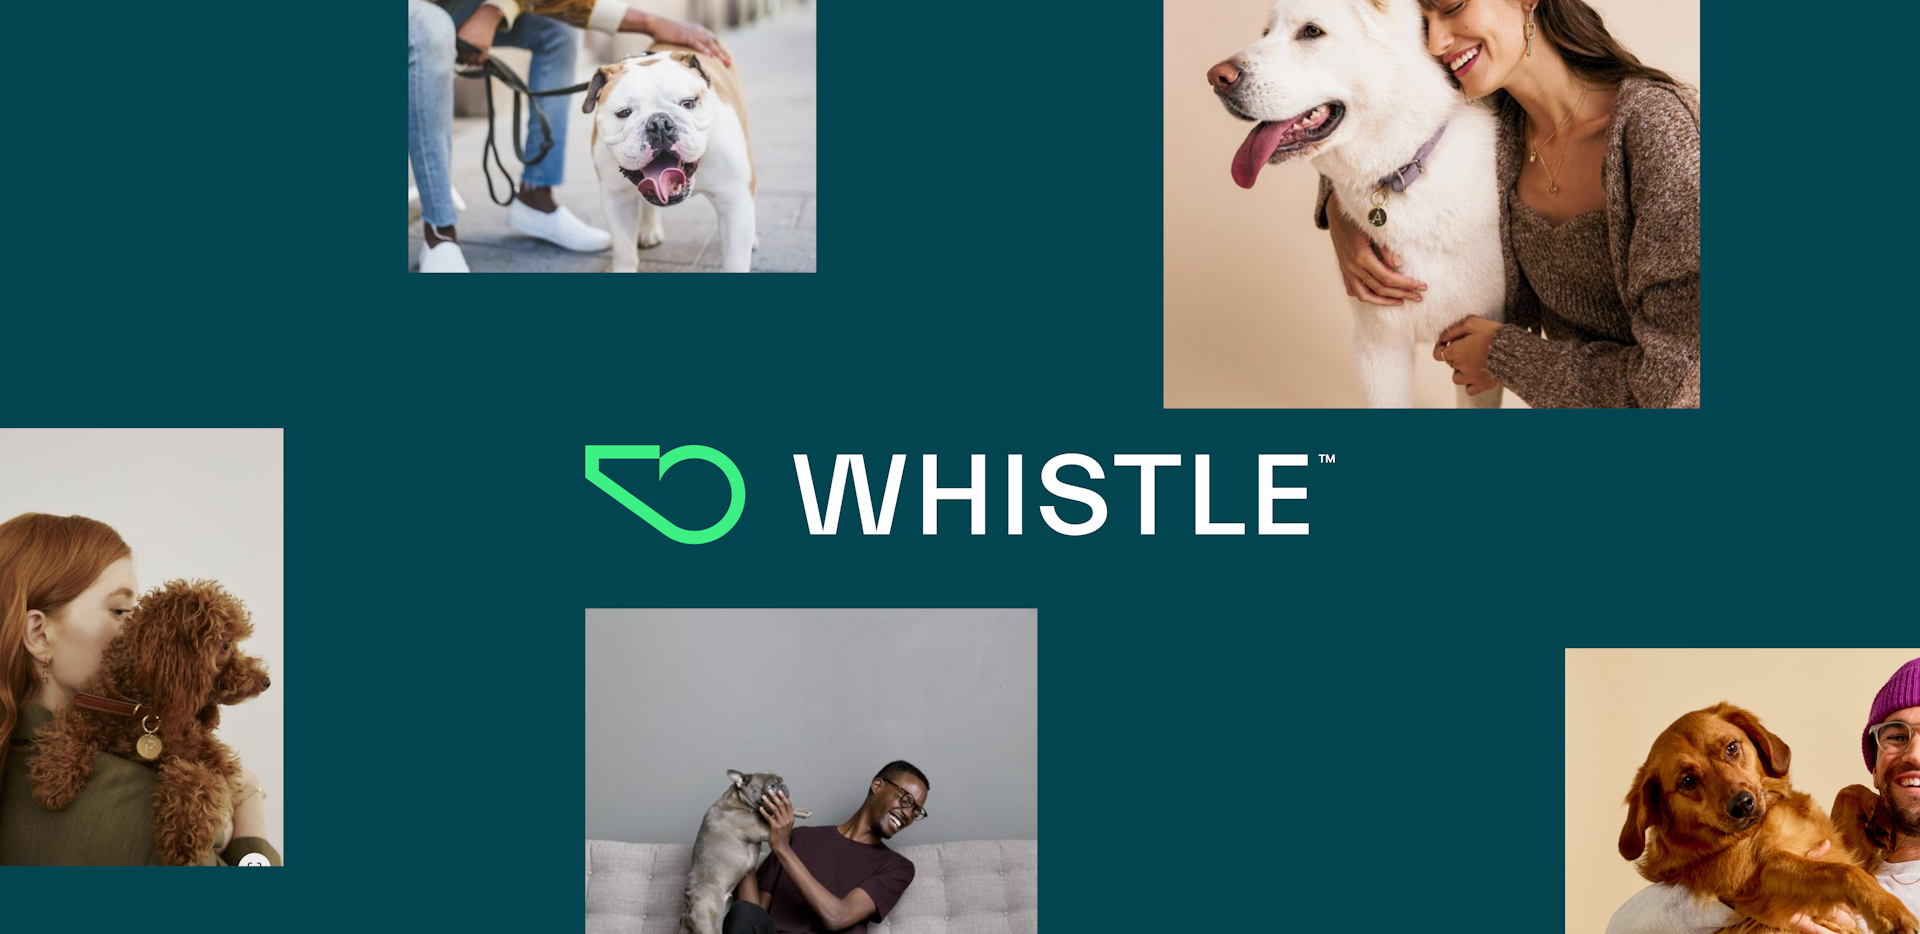 Designs we did for Whistle